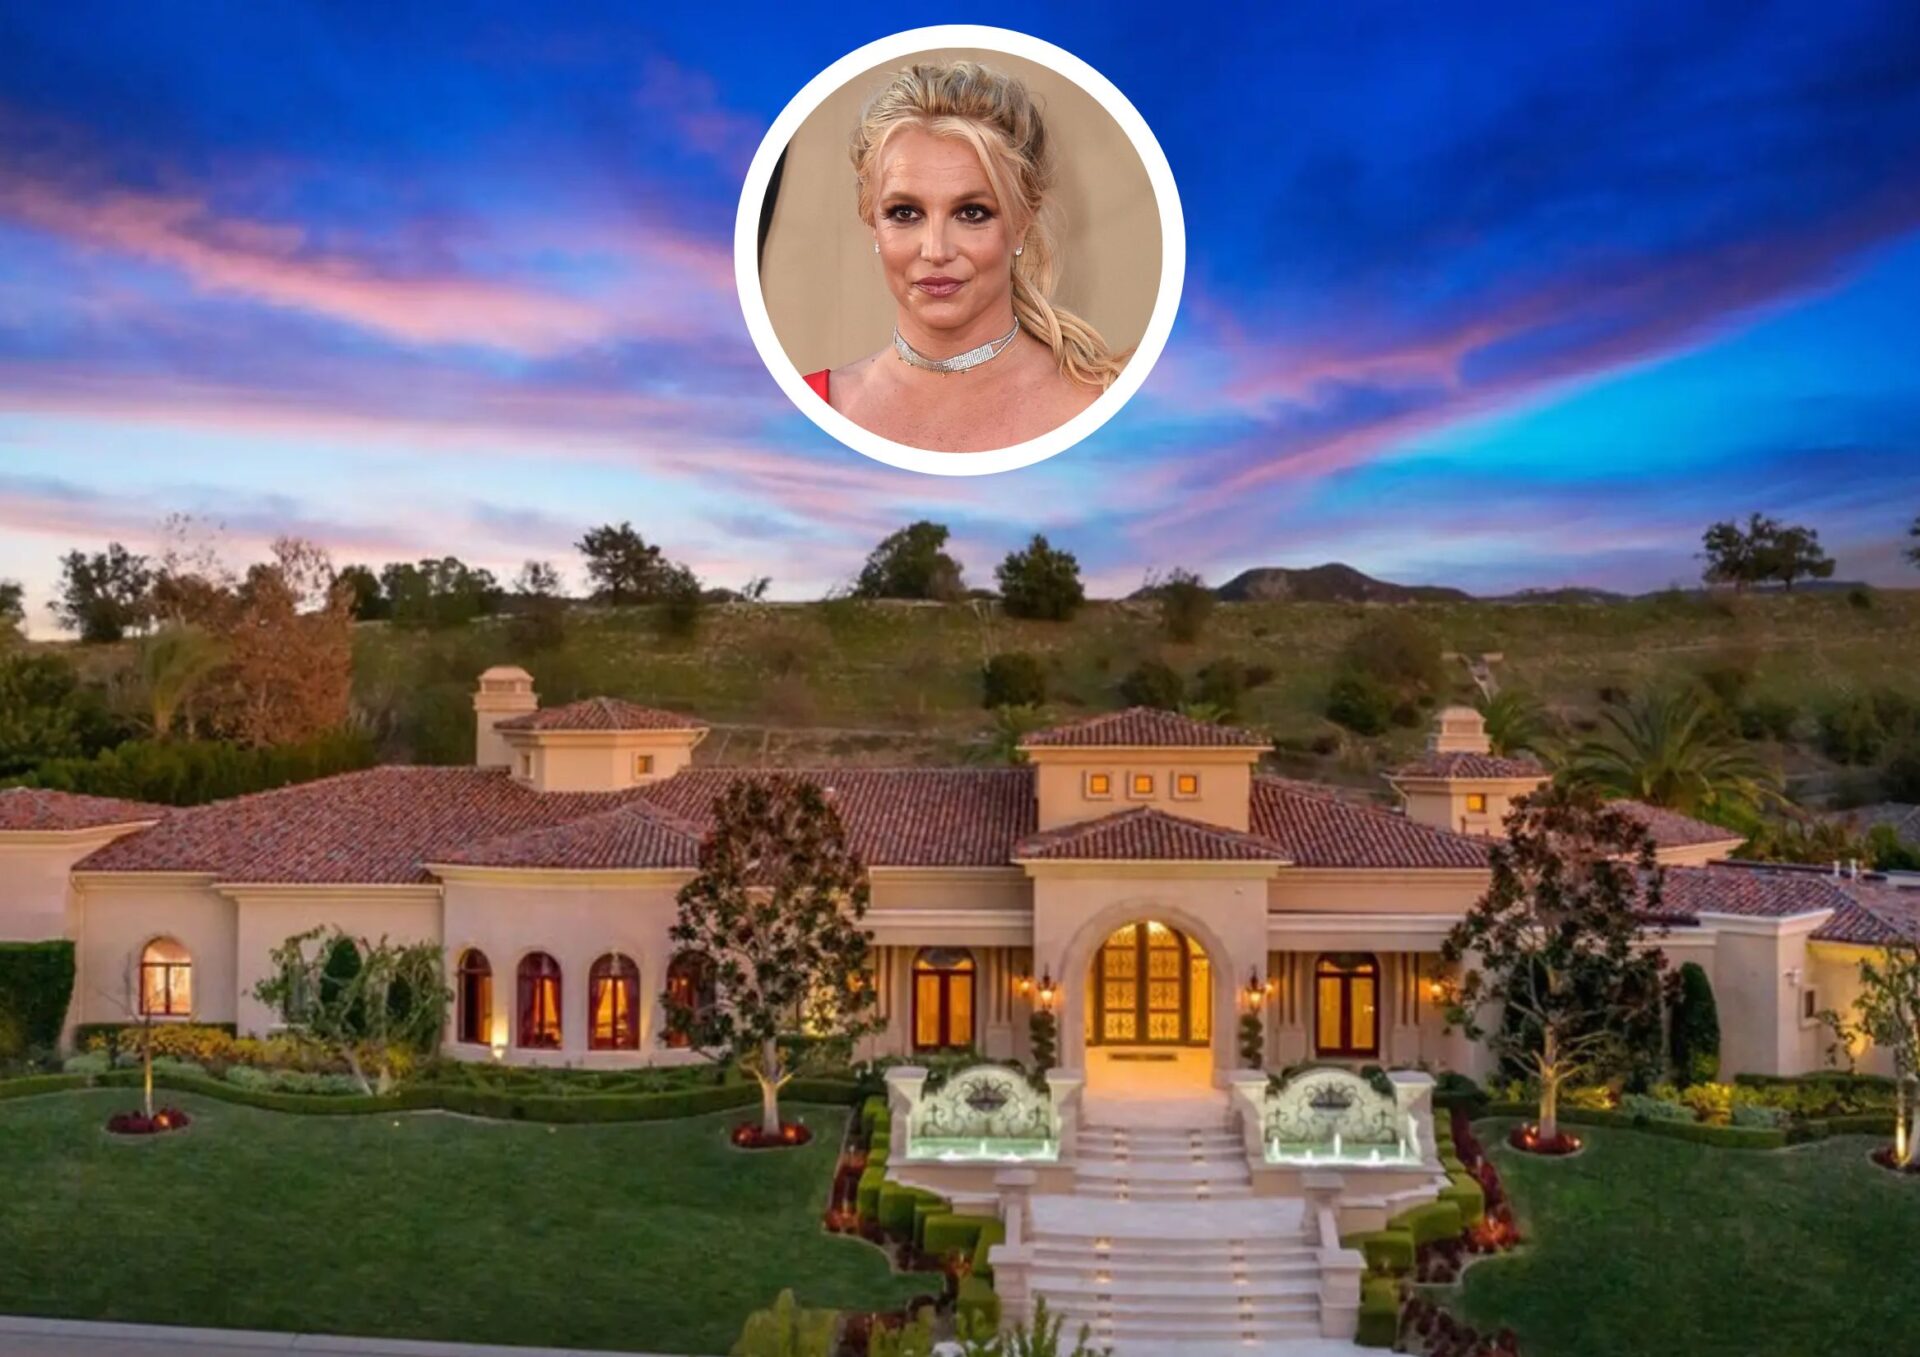 Main Image of Britney Spear's Mansion